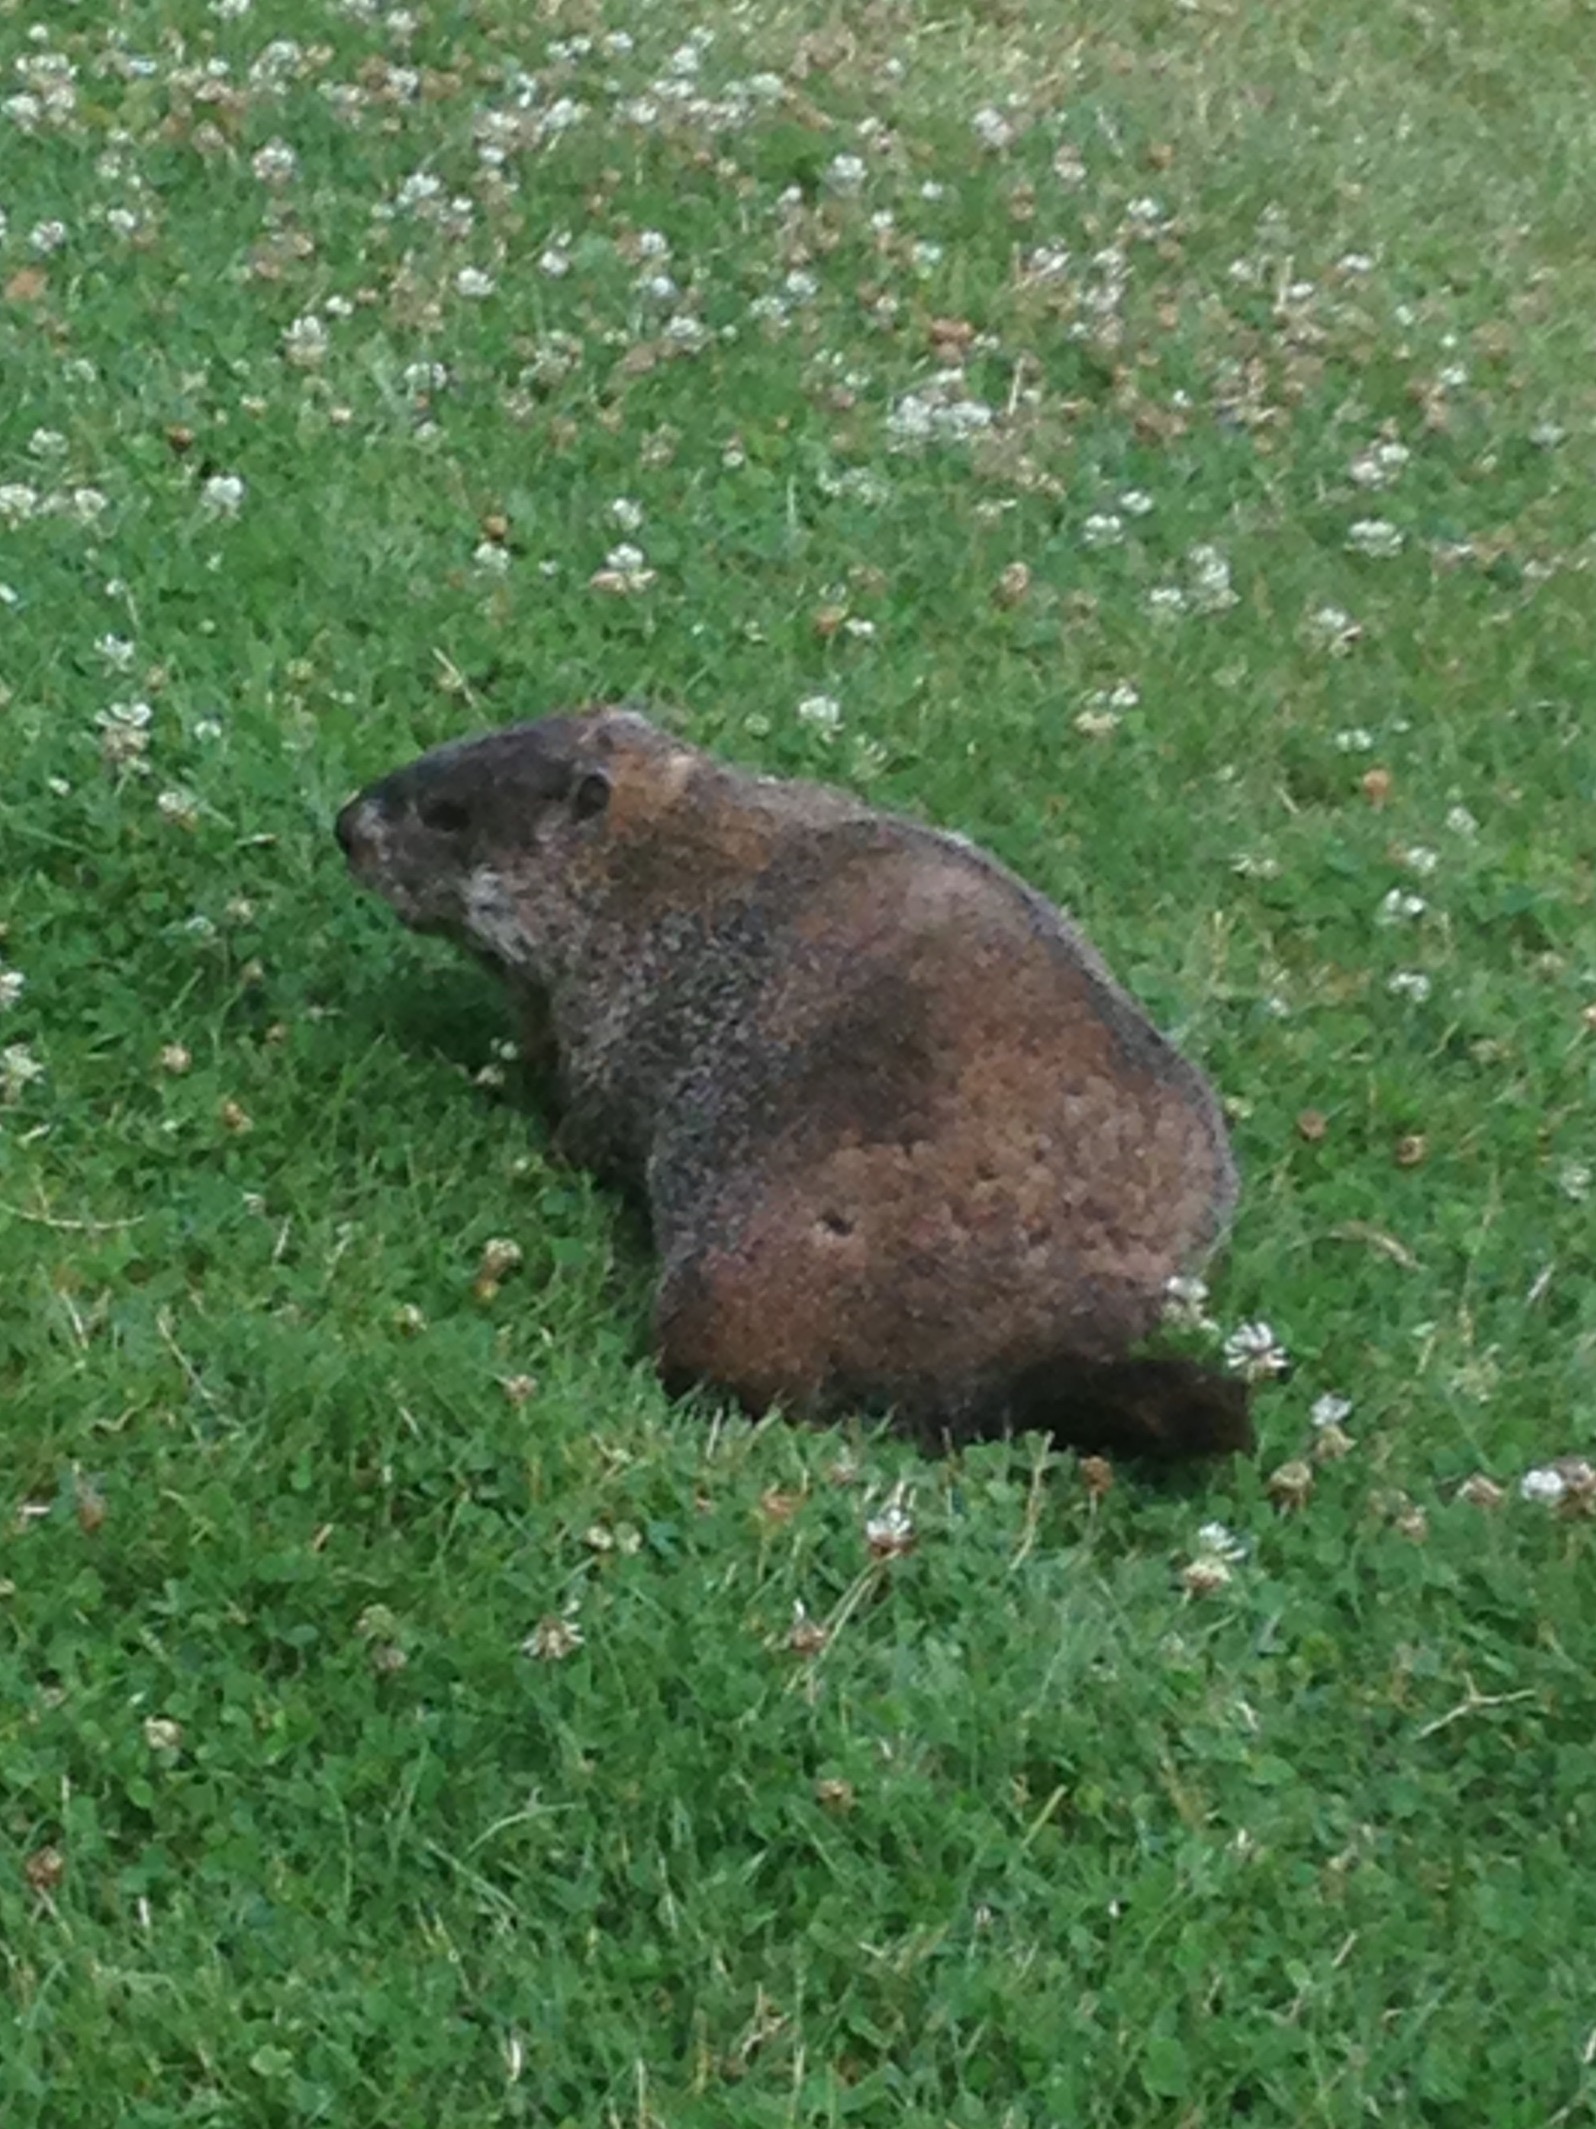 Male groundhogs establish territories. They will mate with the females on their territory, visiting the dens often through the gestation period. Once the young are born, the male does not return until the next breeding season.